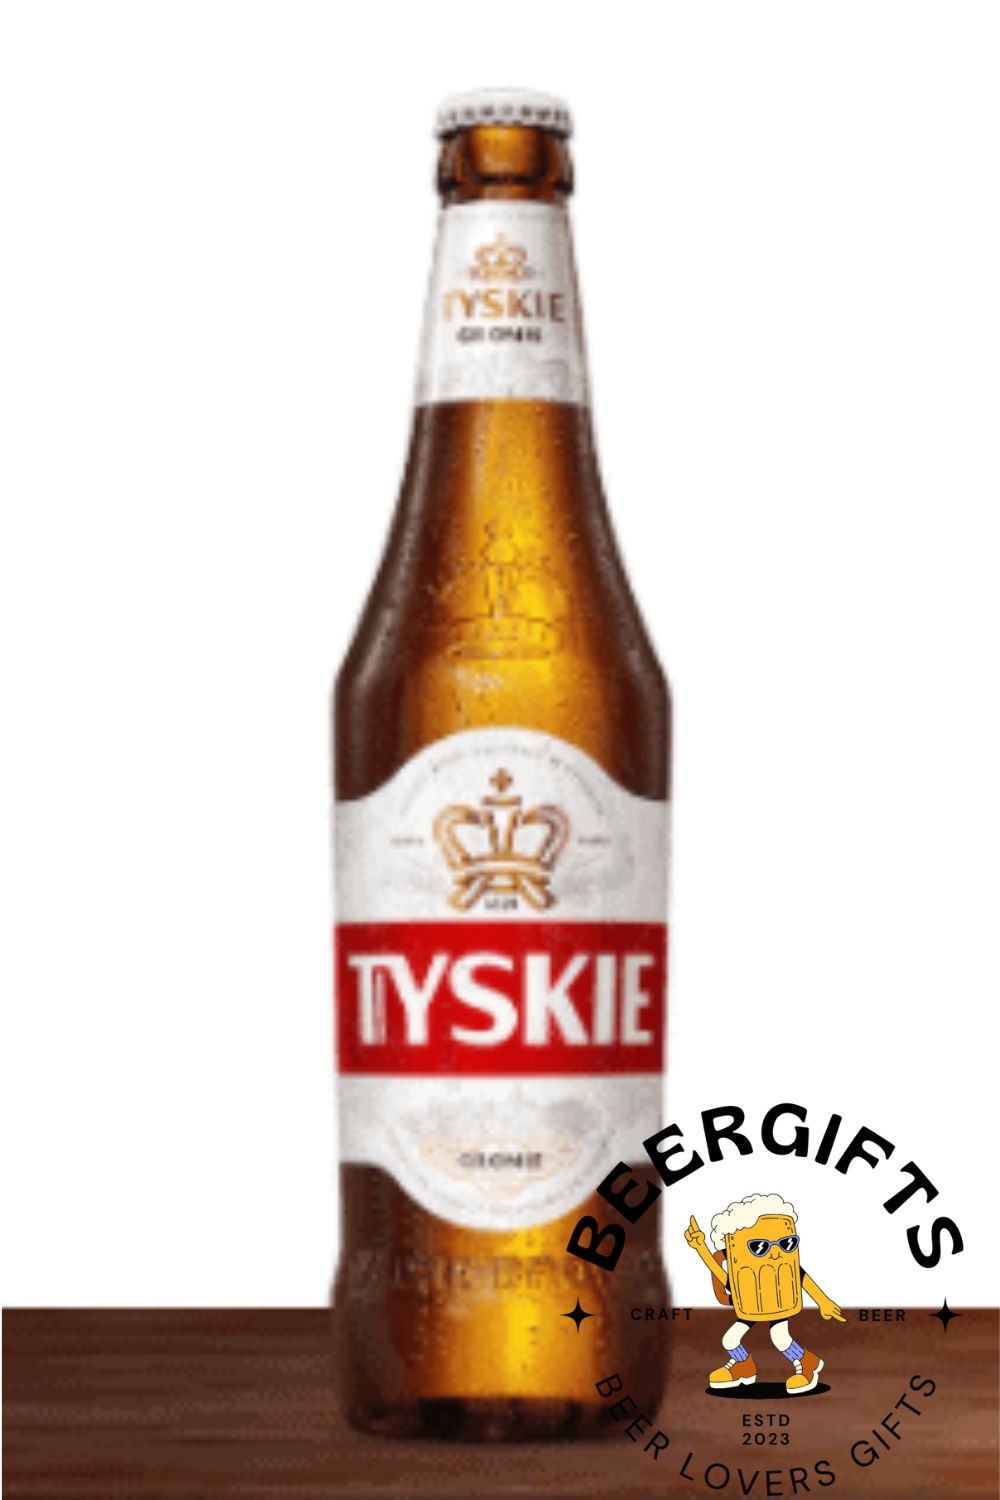 15 Best Polish Beer Brands You May Like7